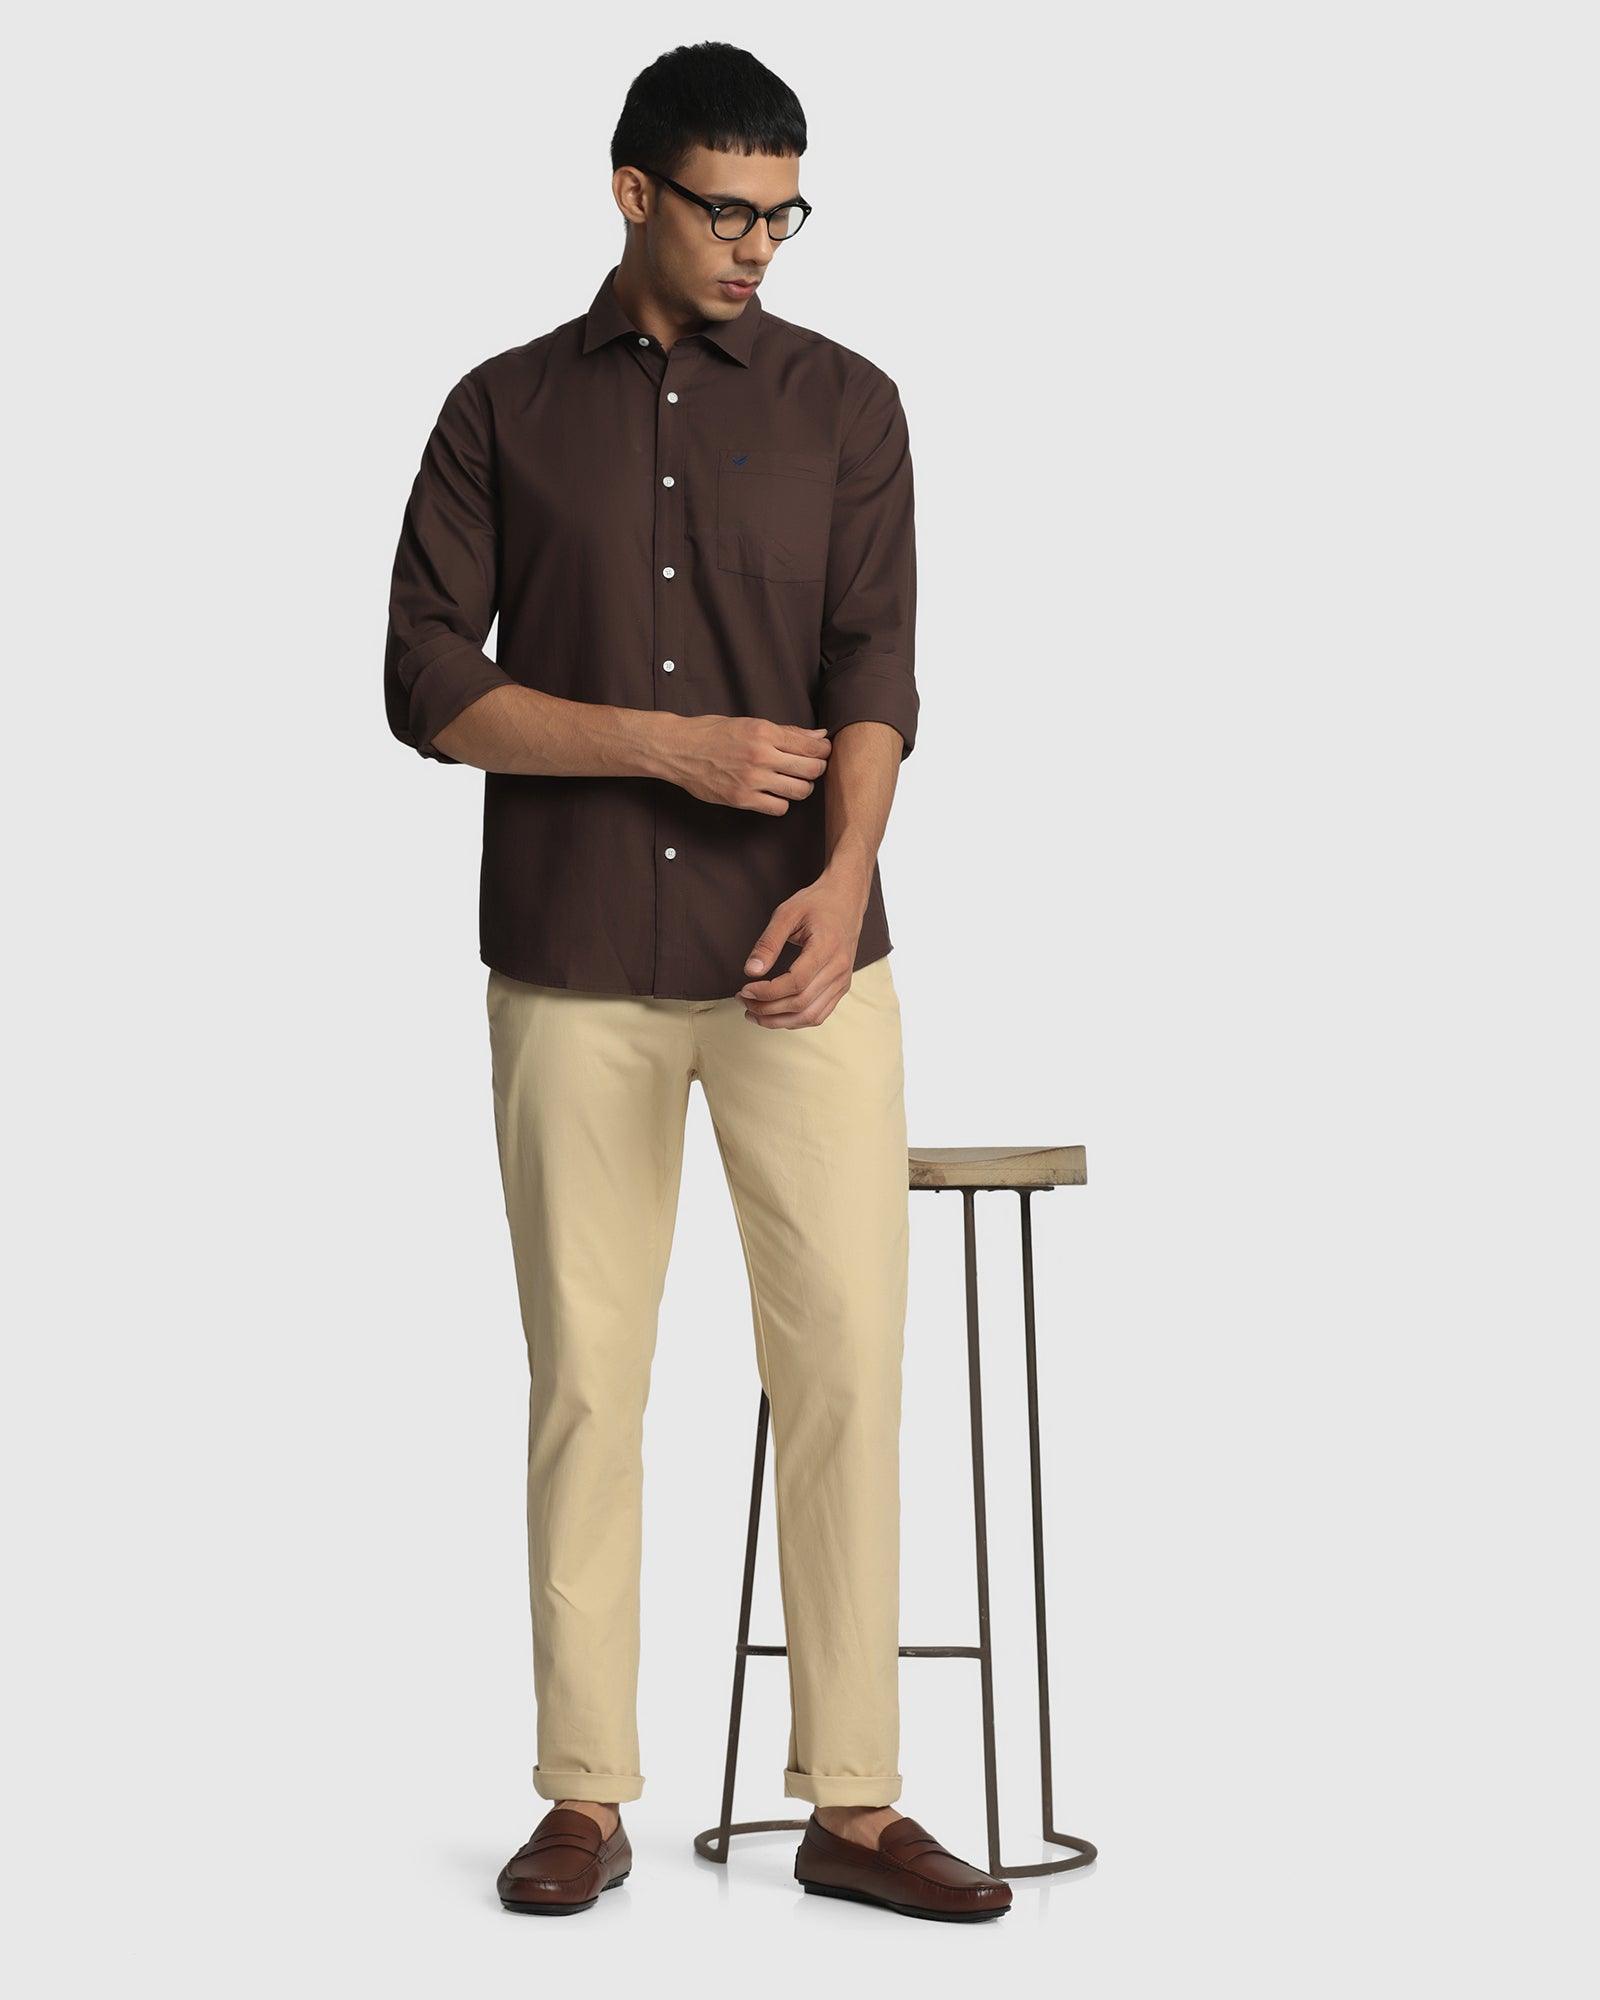 What color dress pants go well with a brown shirt  Quora